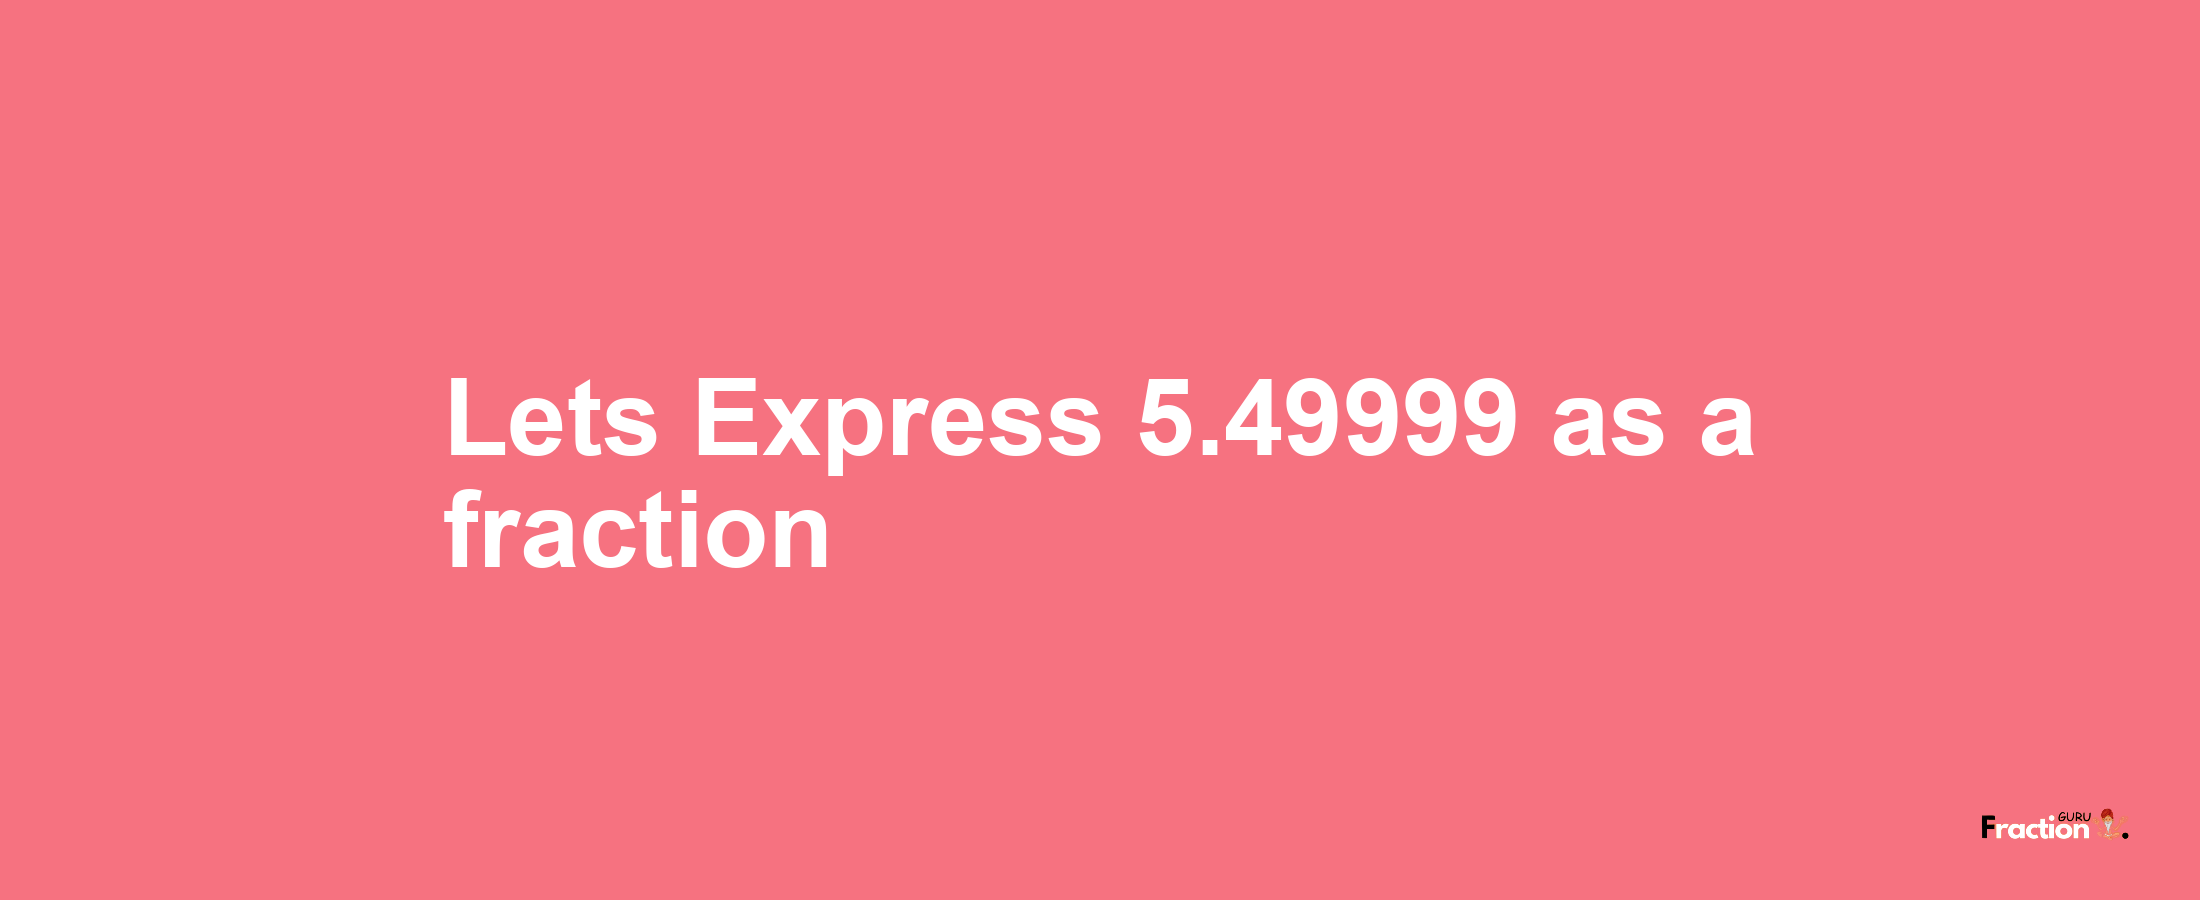 Lets Express 5.49999 as afraction